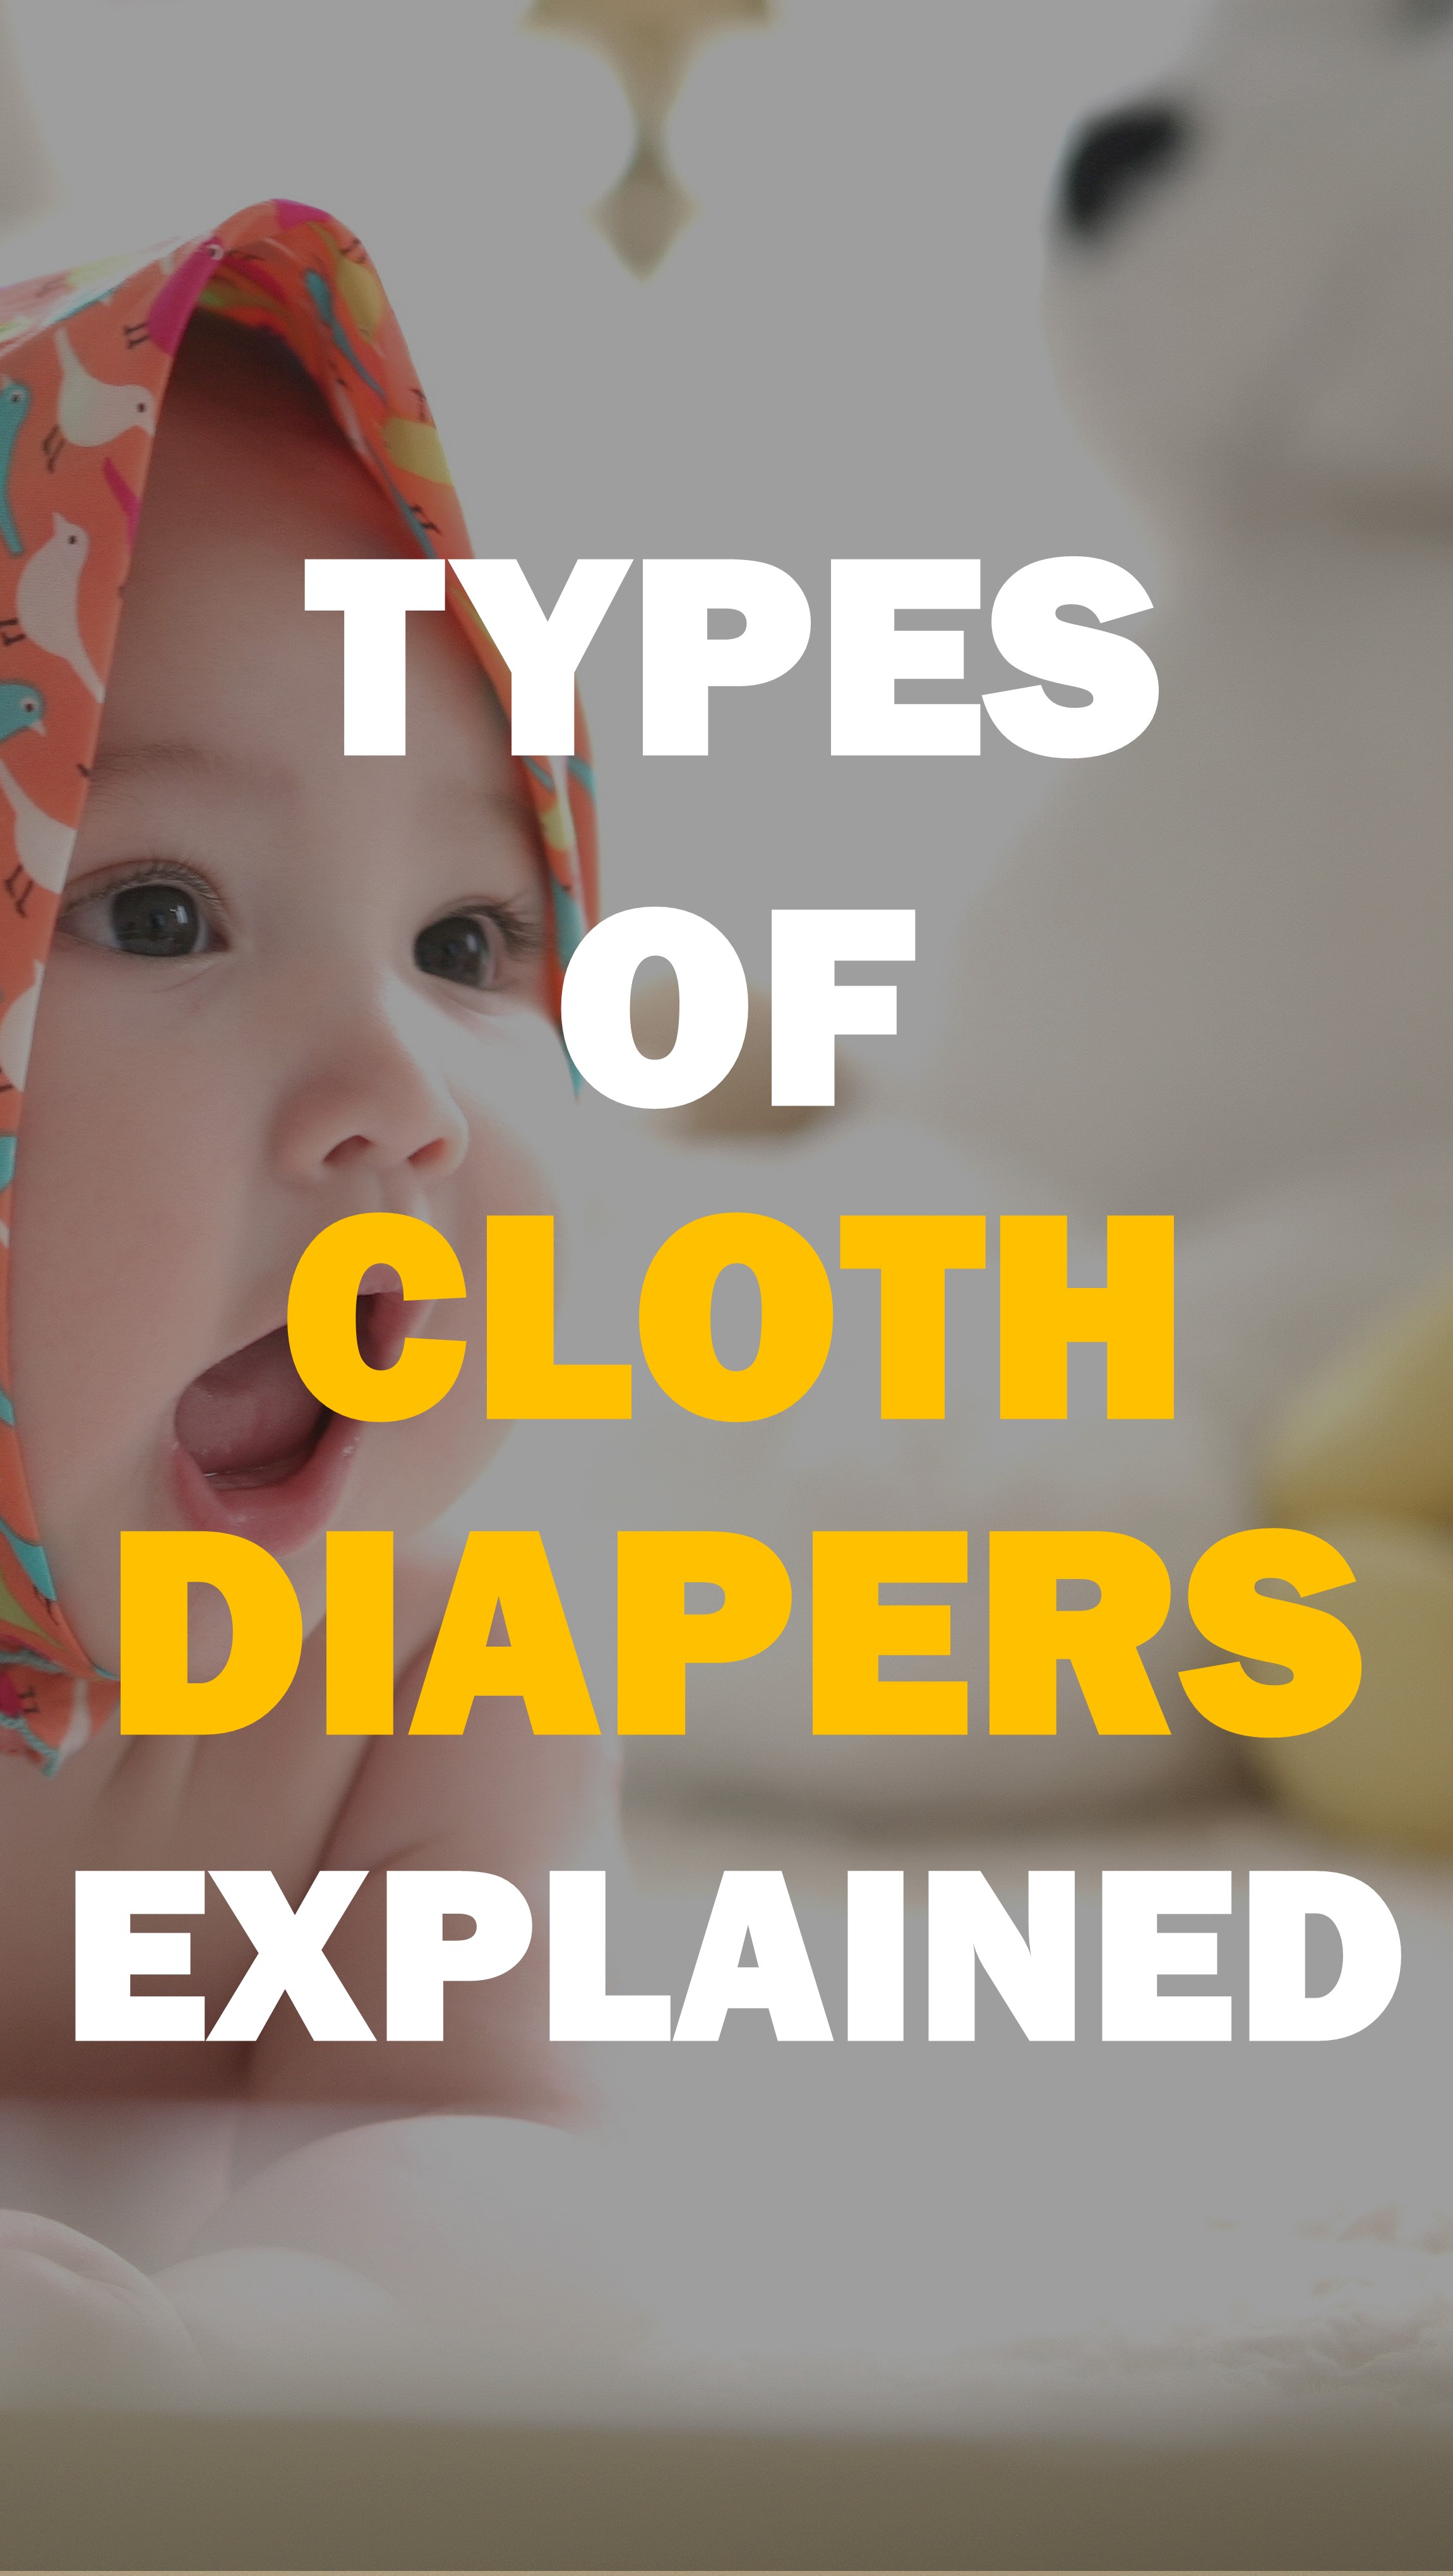 most absorbent flat diapers